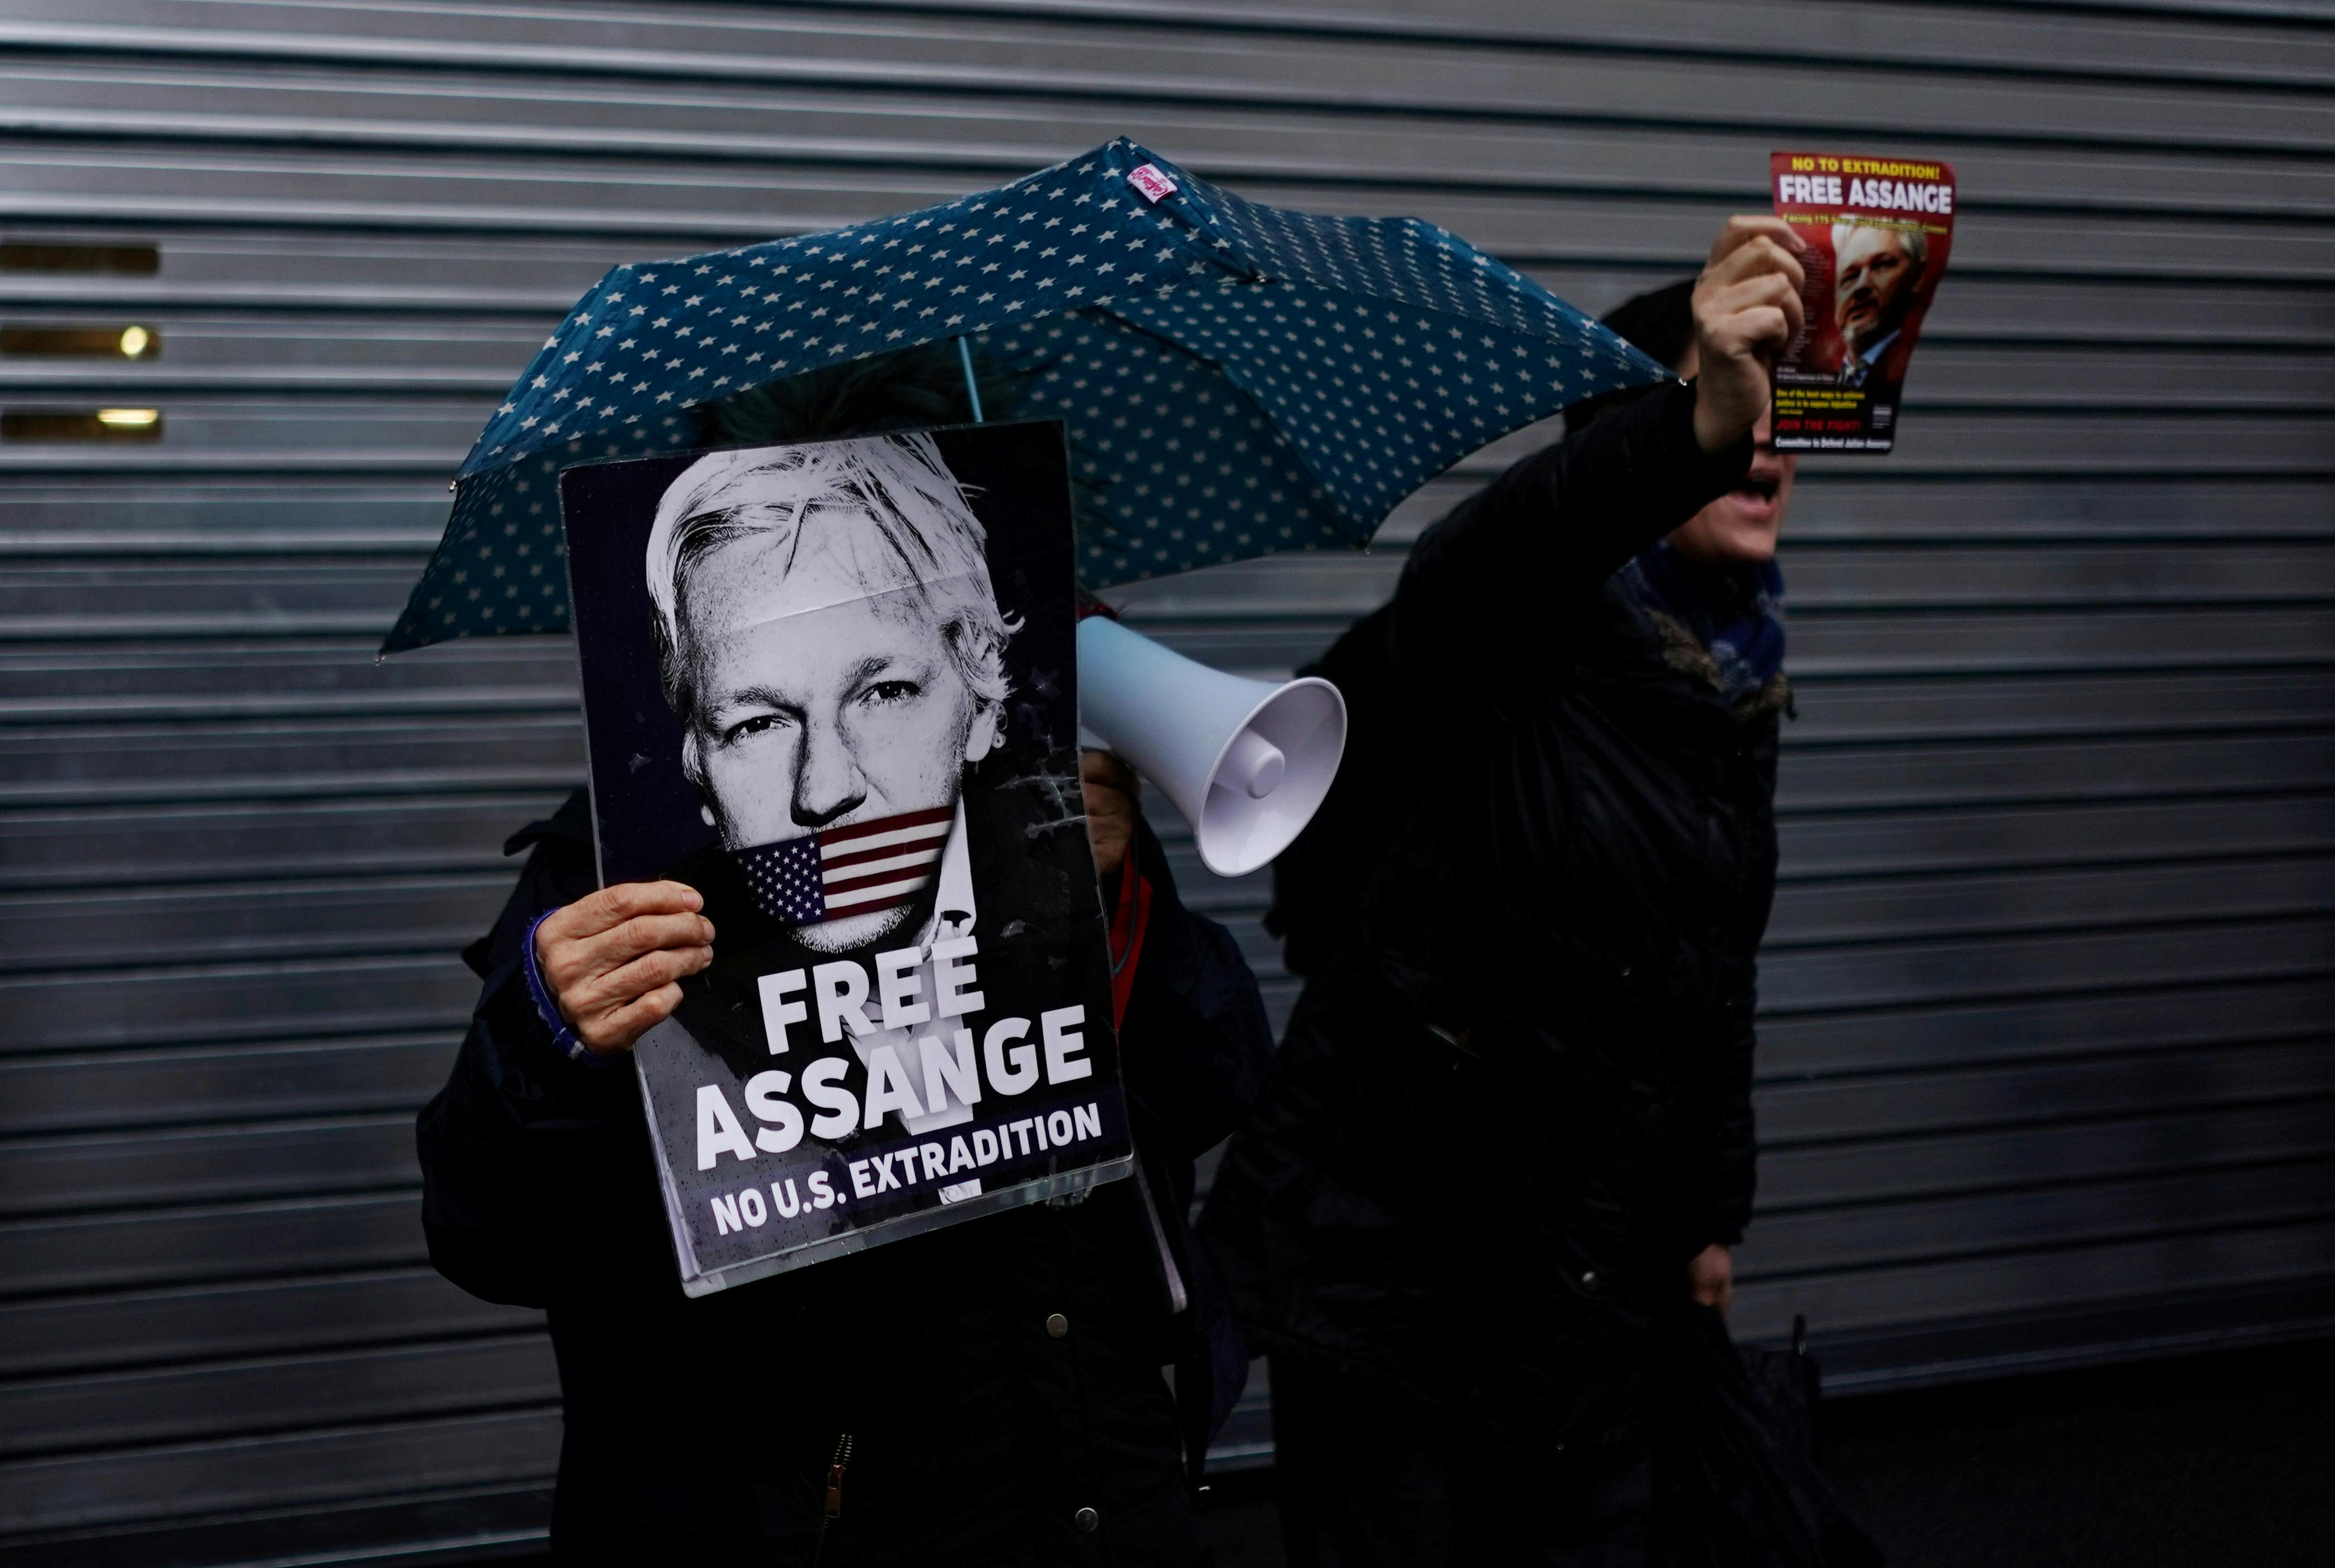 Demonstrators hold placards ahead of WikiLeaks founder Julian Assange appearing before the Spanish High Court via videolink, in London, Britain, December 20, 2019. REUTERS/Henry Nicholls